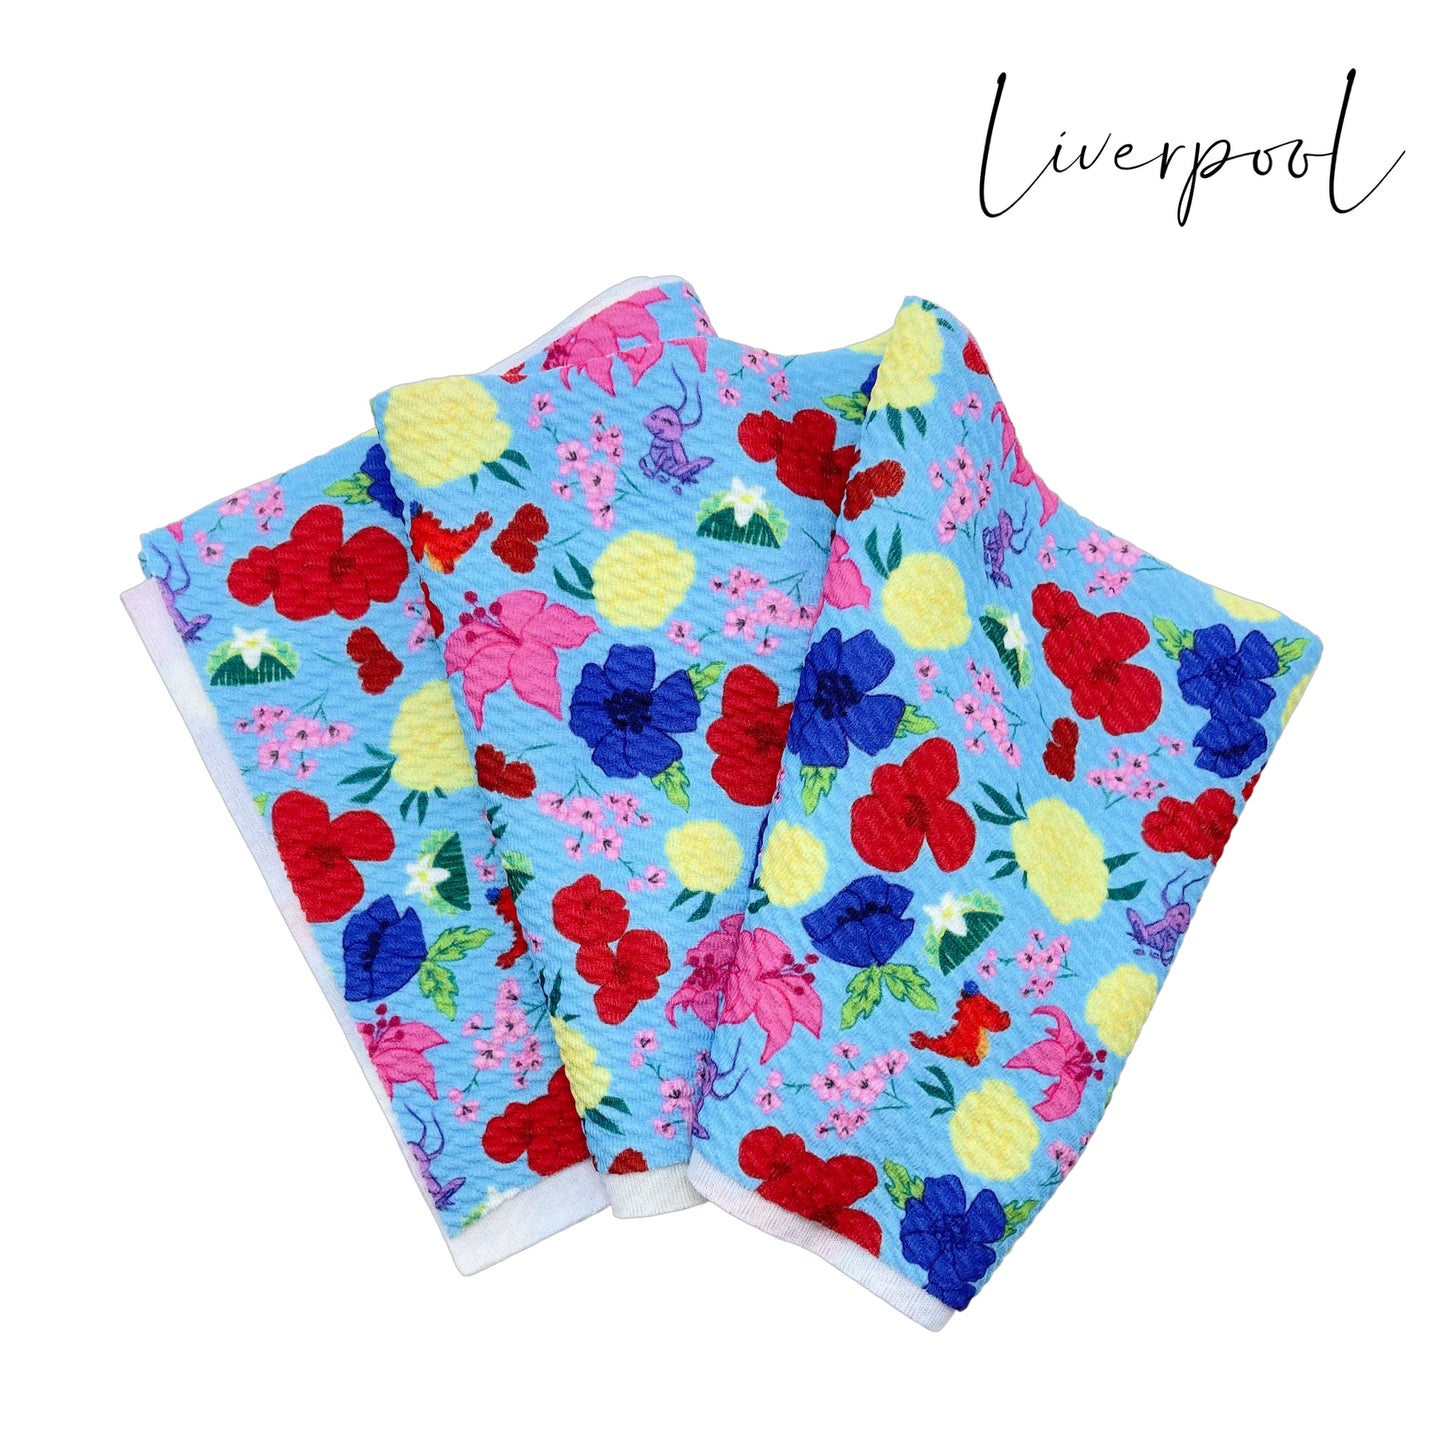 Folded light blue liverpool fabric with yellow, pink, royal blue, and red floral princess pattern including crickets, hair clips, and a red dragon.